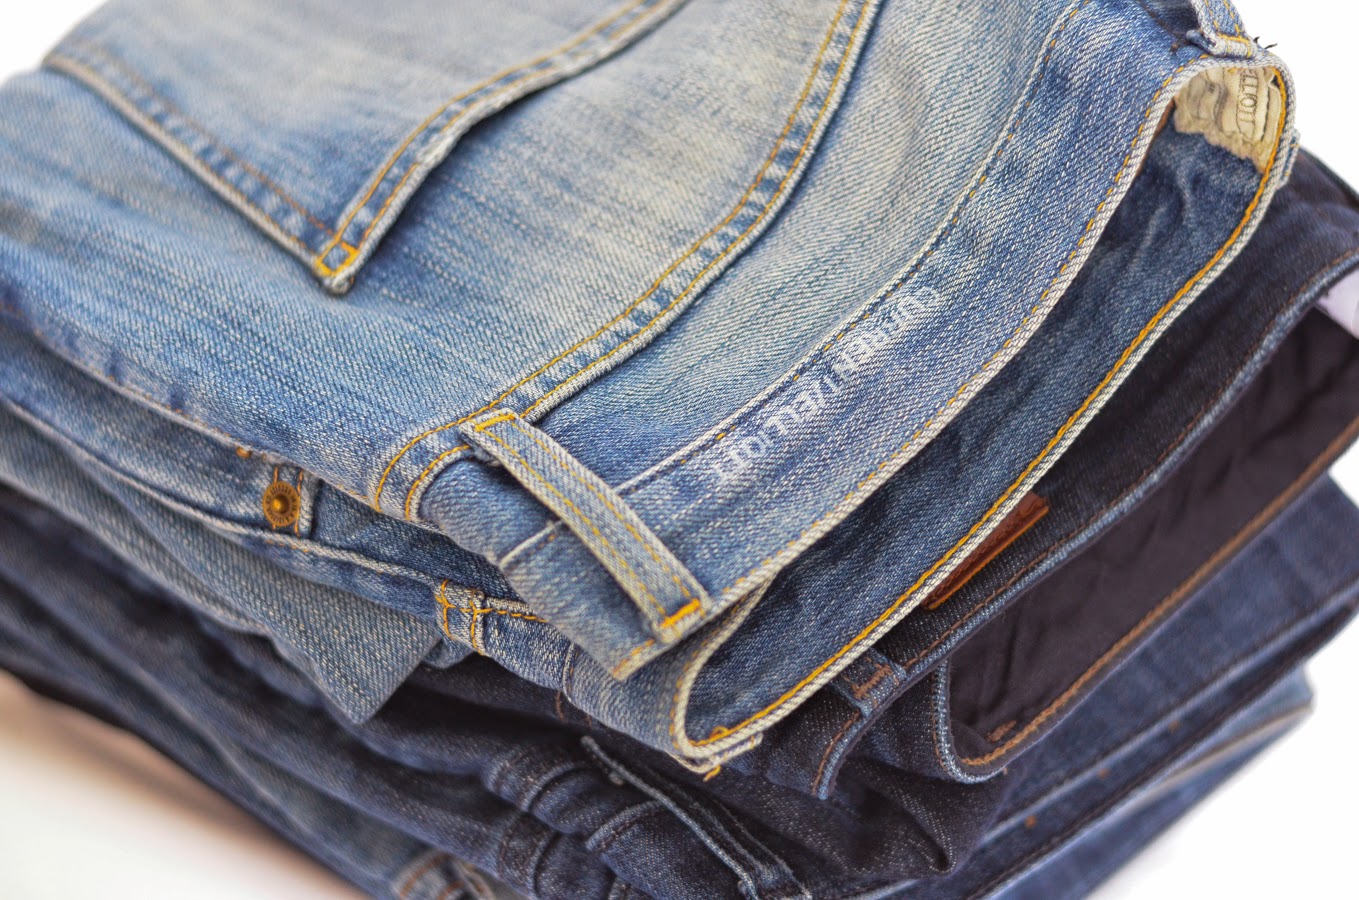 Should You Wash Your Jeans